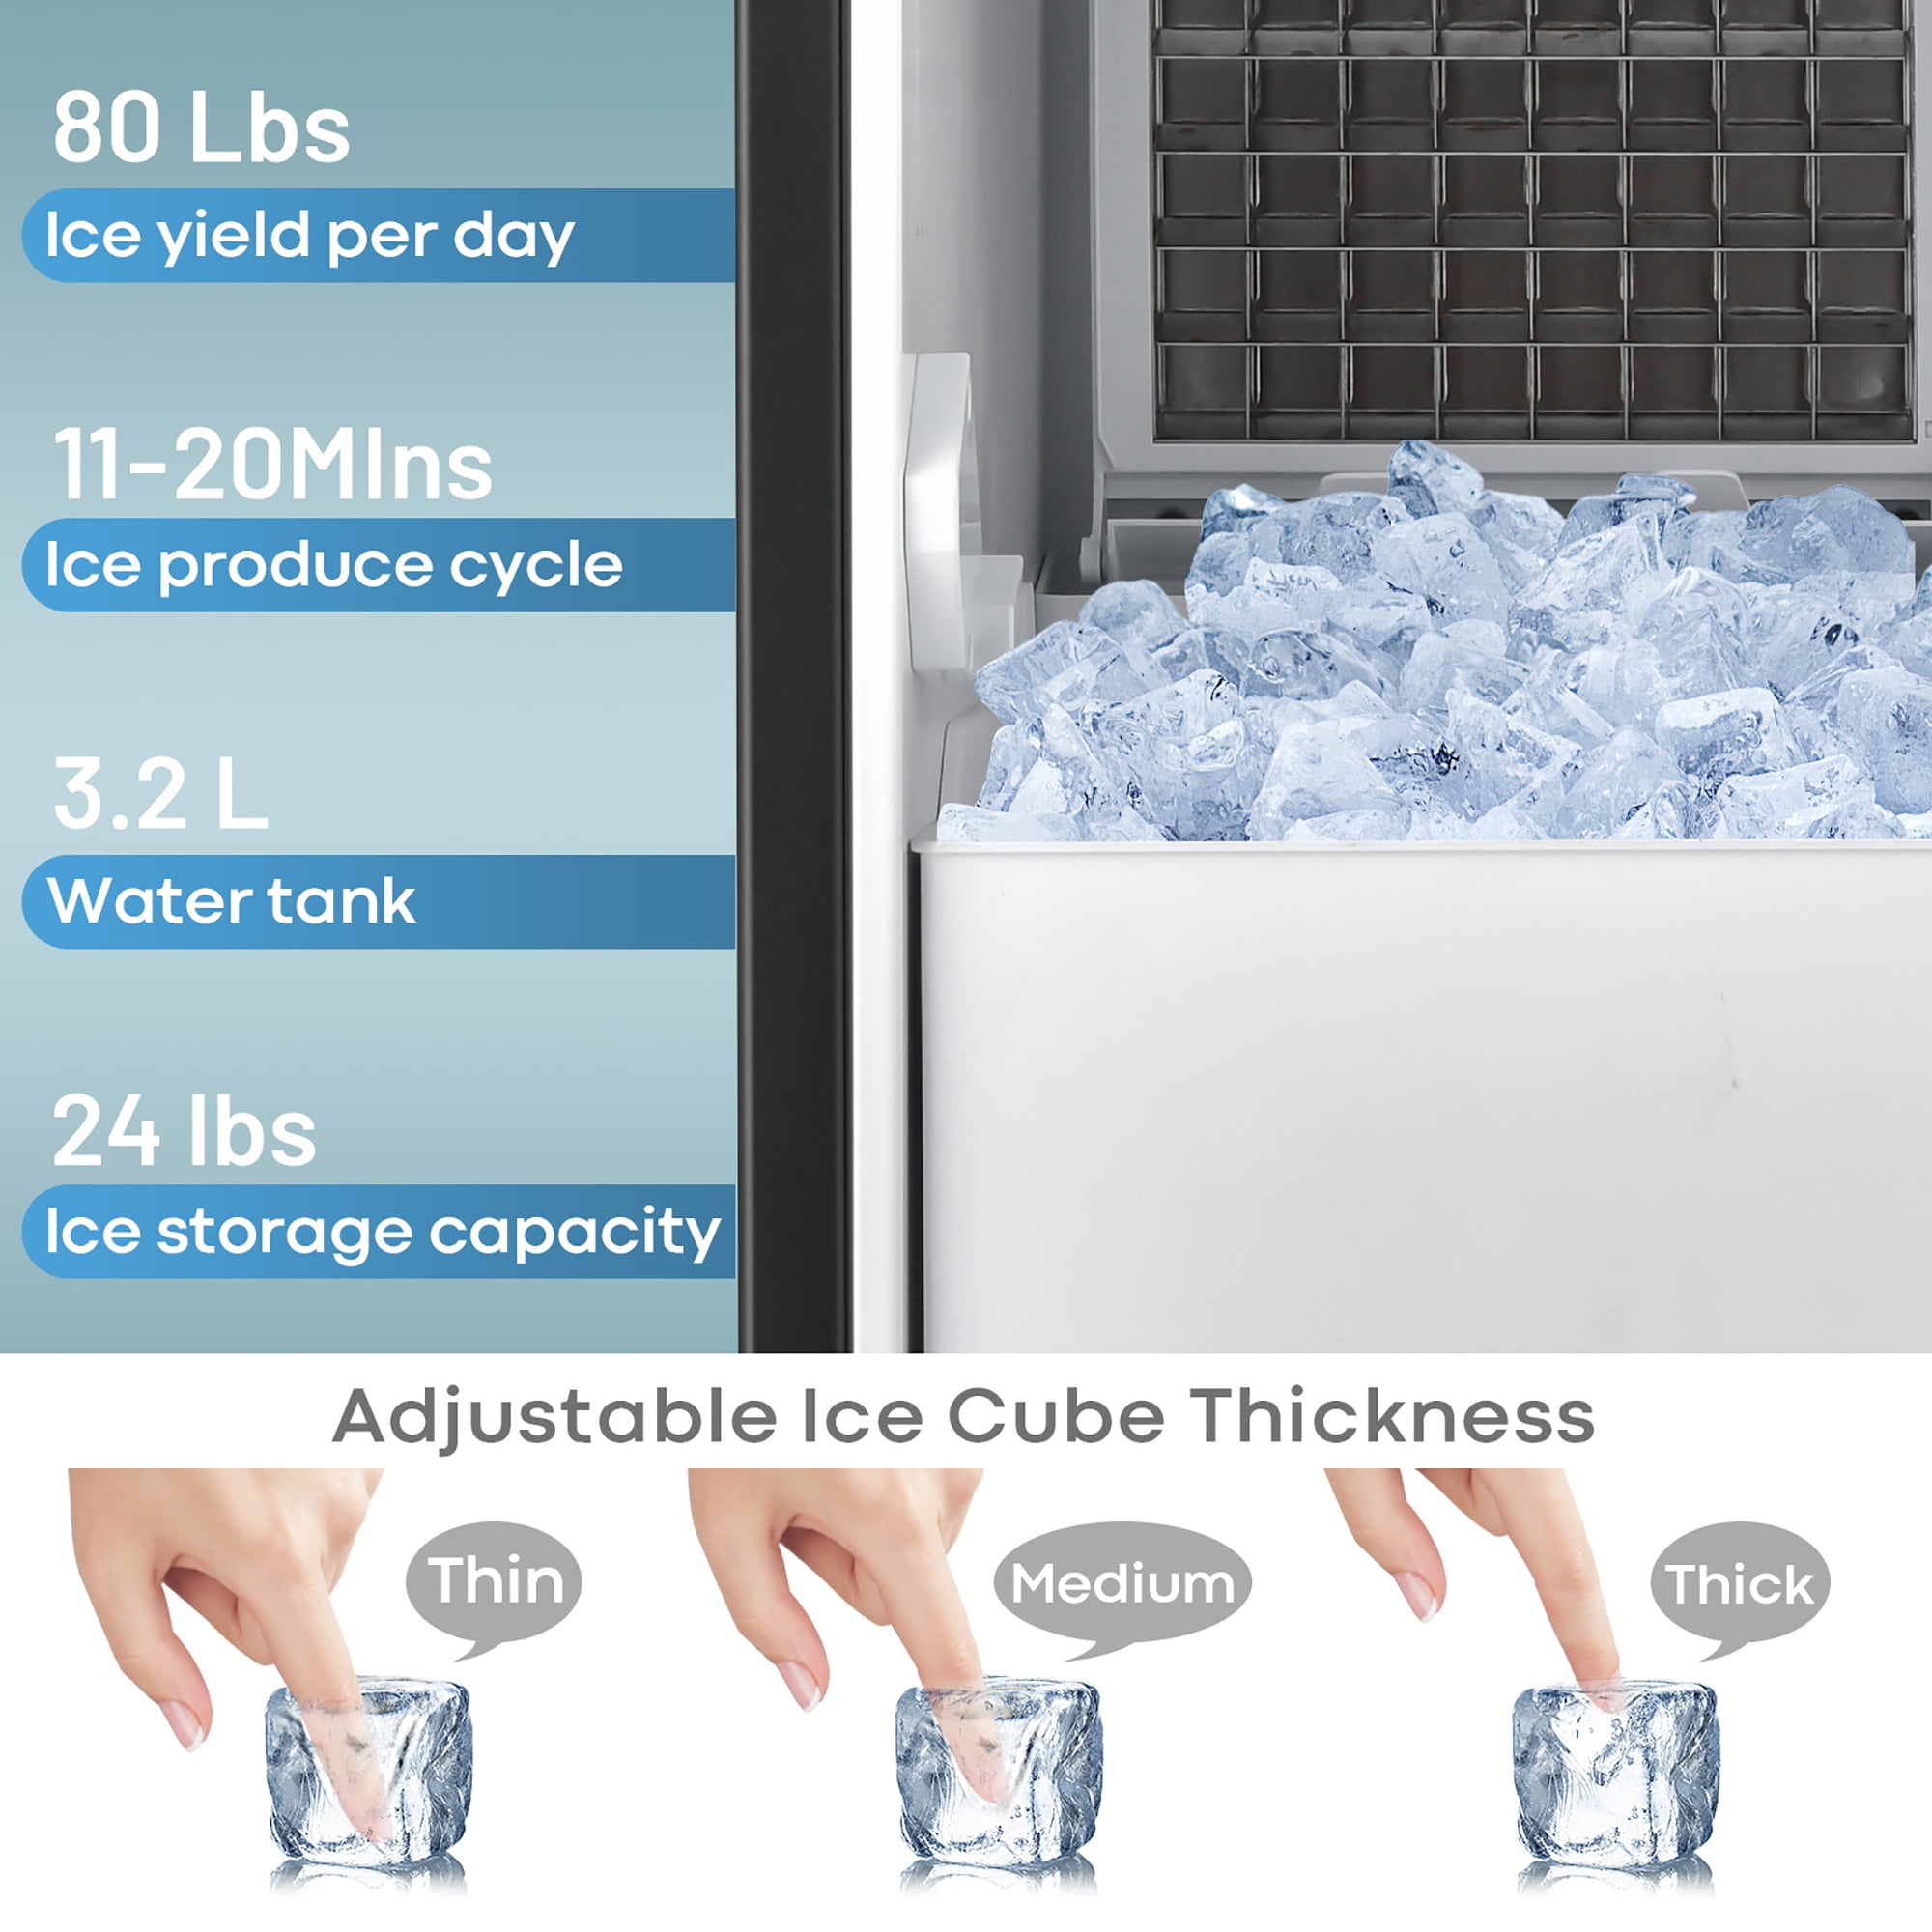 115V Free-Standing Undercounter Built-In Ice Maker with Self-Cleaning  Function - Costway